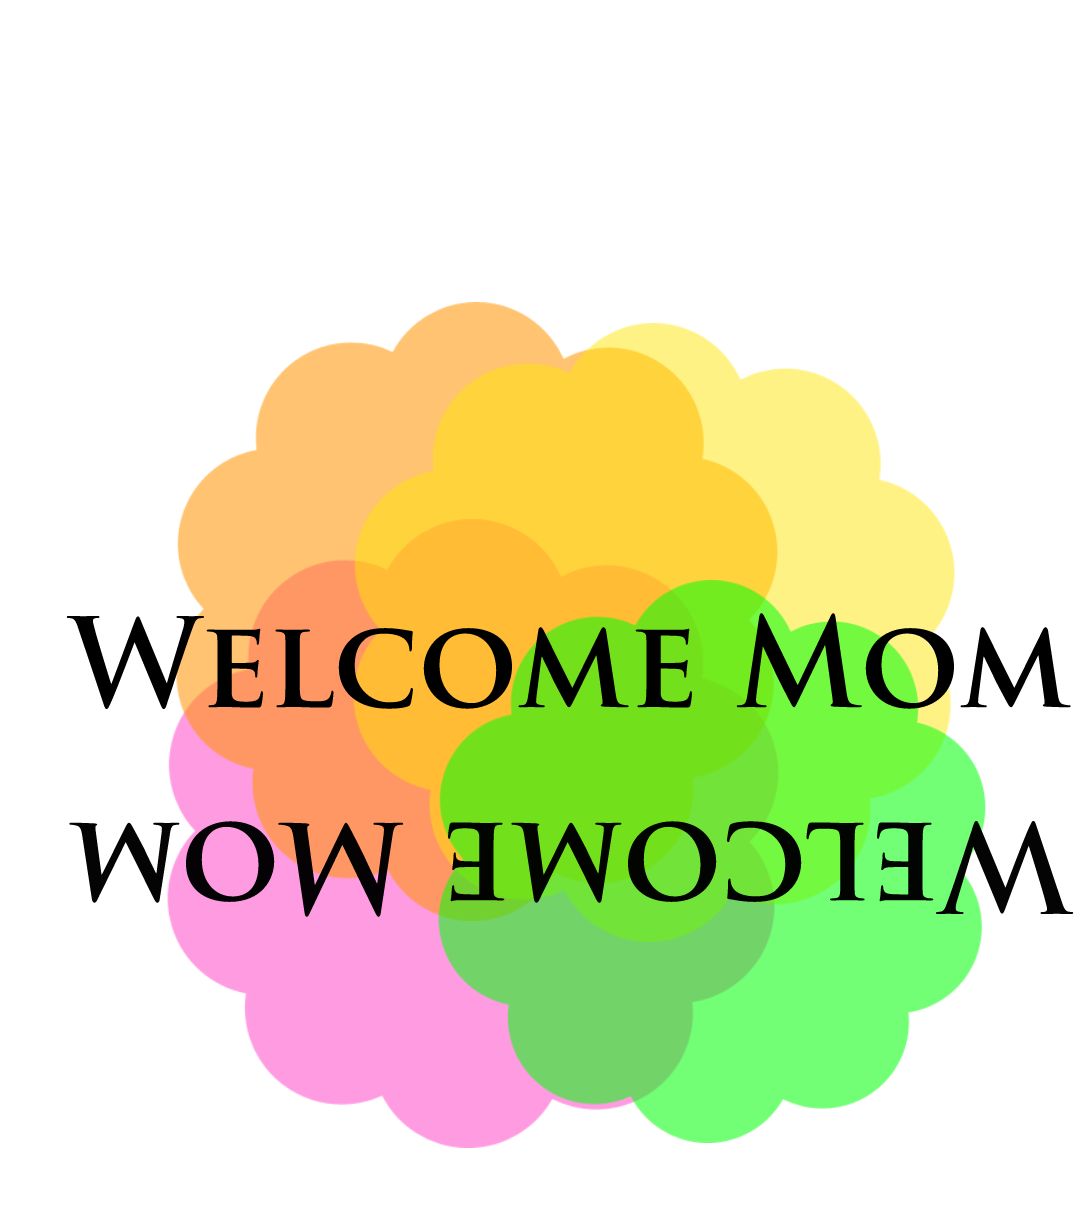 Mom welcome